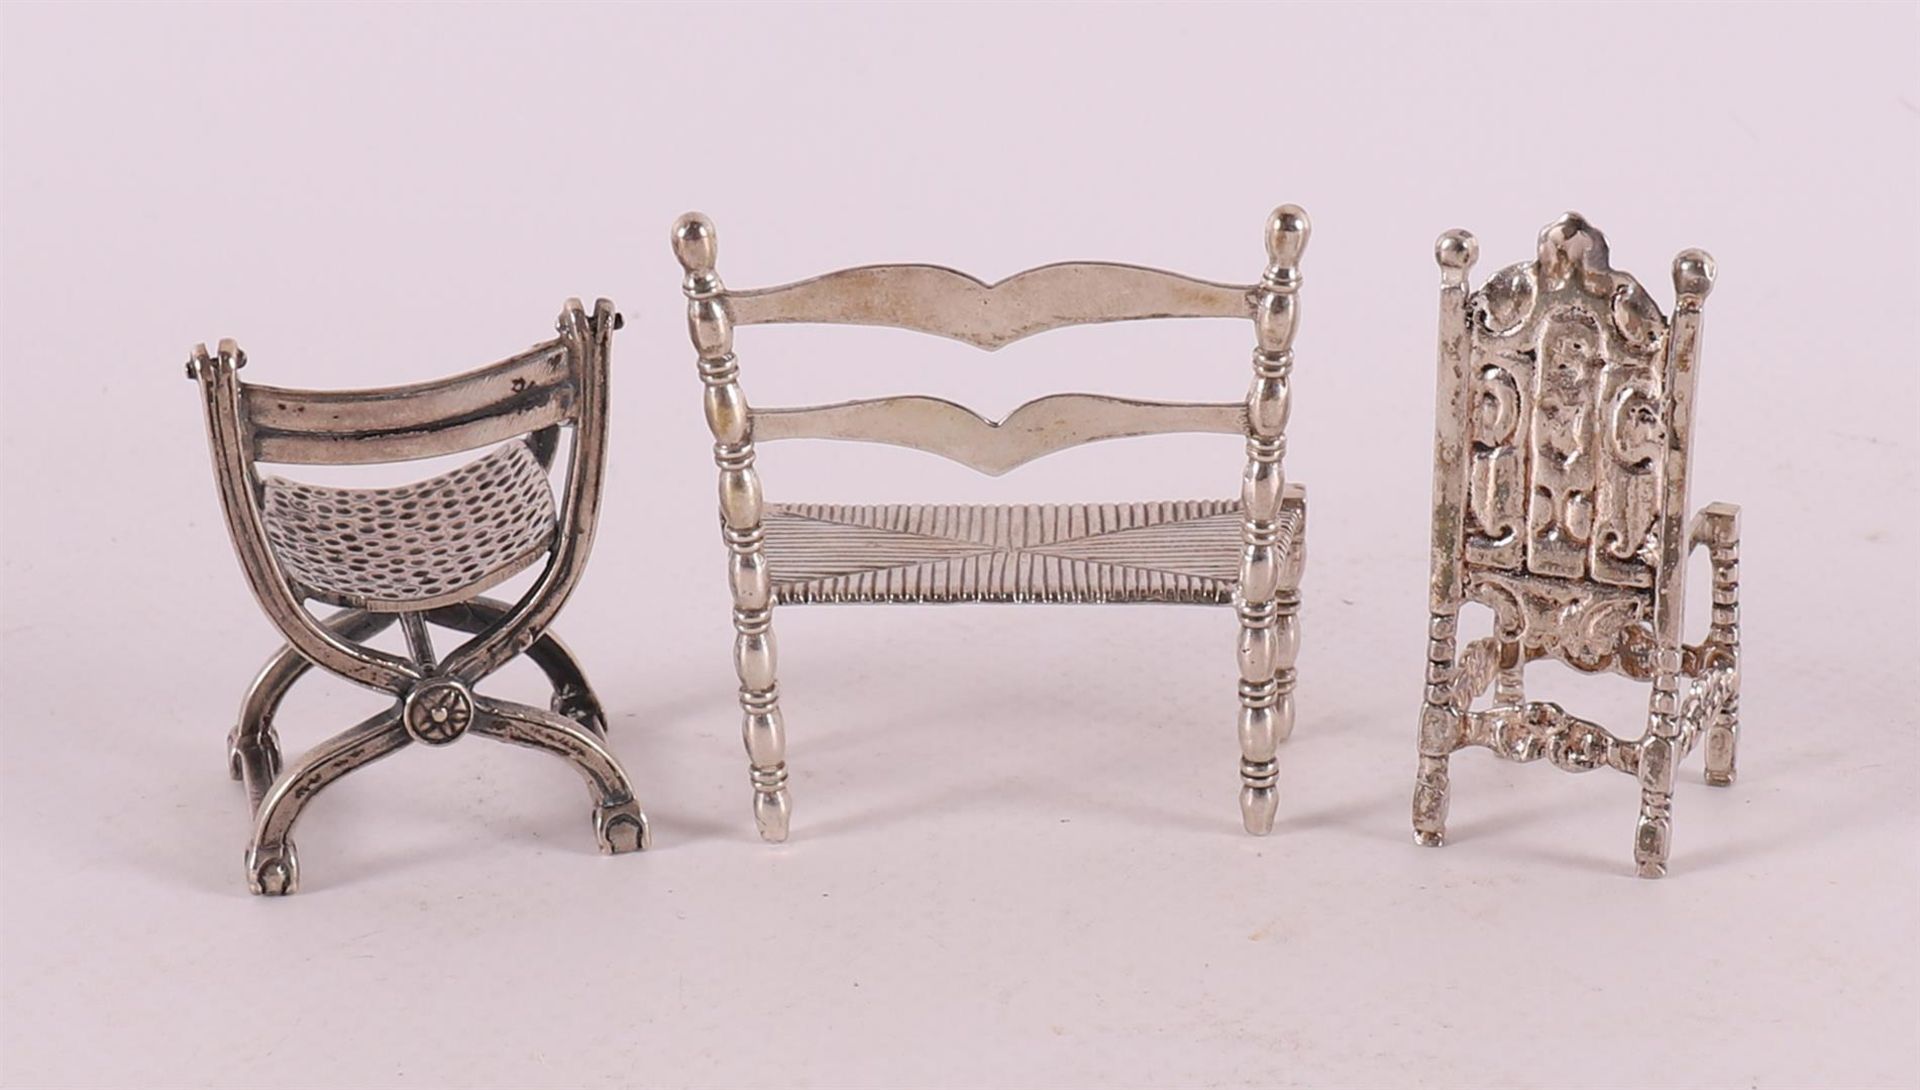 Etagere silver. A second grade silver bench, Amsterdam 20th century + 2 chairs. - Image 2 of 2